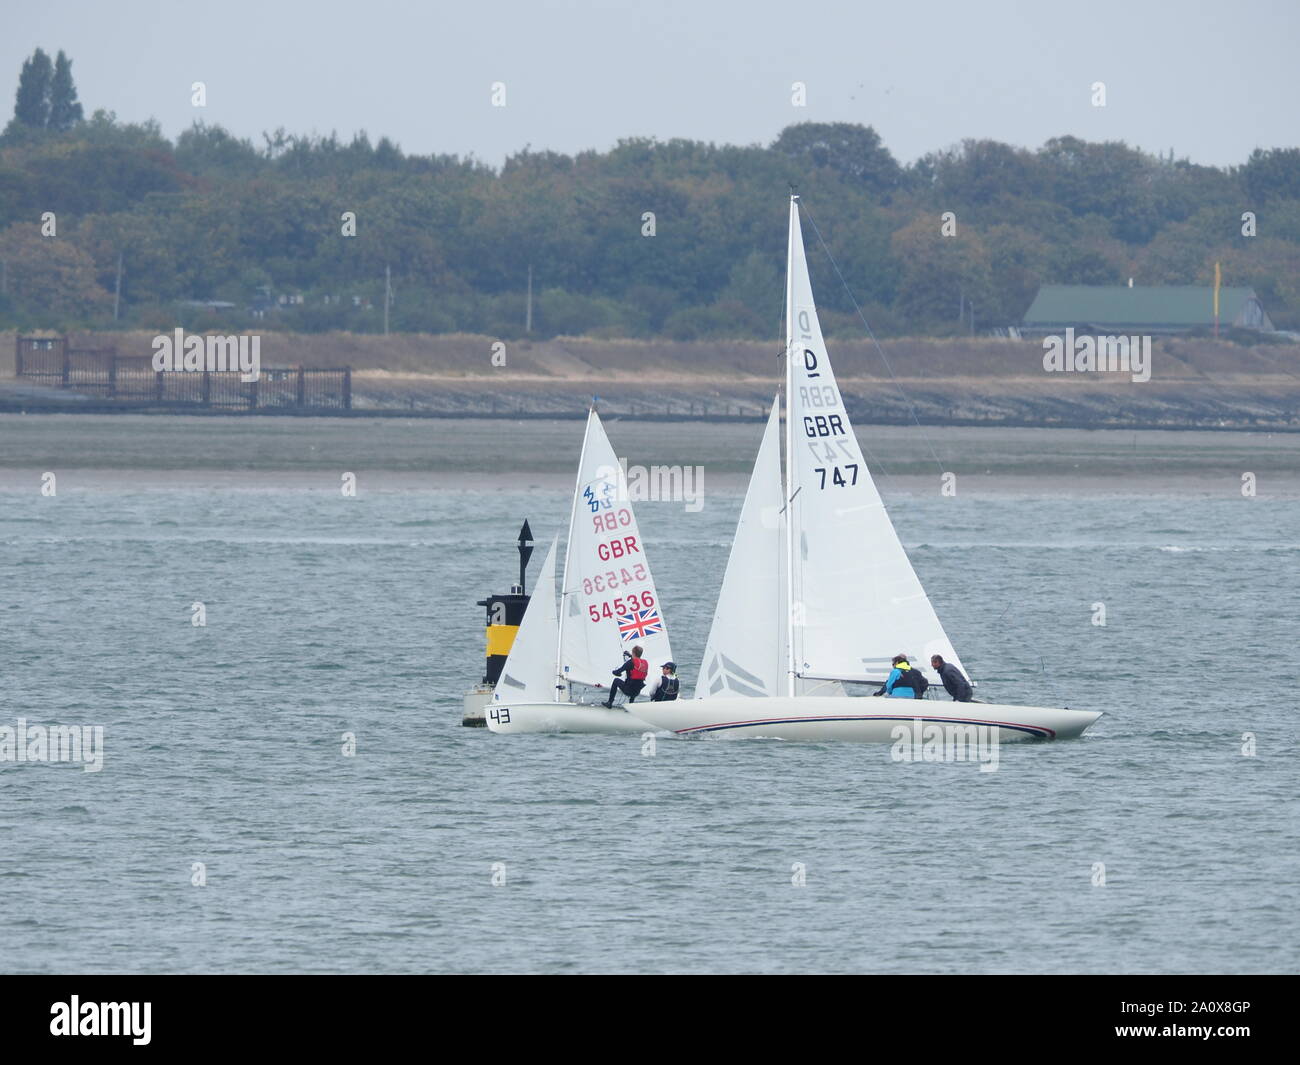 Queenborough, Kent, UK. 22nd September, 2019. 56th Medway Marathon - an annual 26 mile course on the tidal River Medway organised by Medway Yacht Club and open to both keelboats and sailing dinghies. The course starts at Upnor Rochester, and utilises various creeks on the Medway to make up the distance with the Queenborough Spit Buoy at the eastern extreme of the course. Pic: a 420 dinghy rounds the Queenborough Spit buoy ahead of a 3-person  Dragon keelboat. Credit: James Bell/Alamy Live News Stock Photo